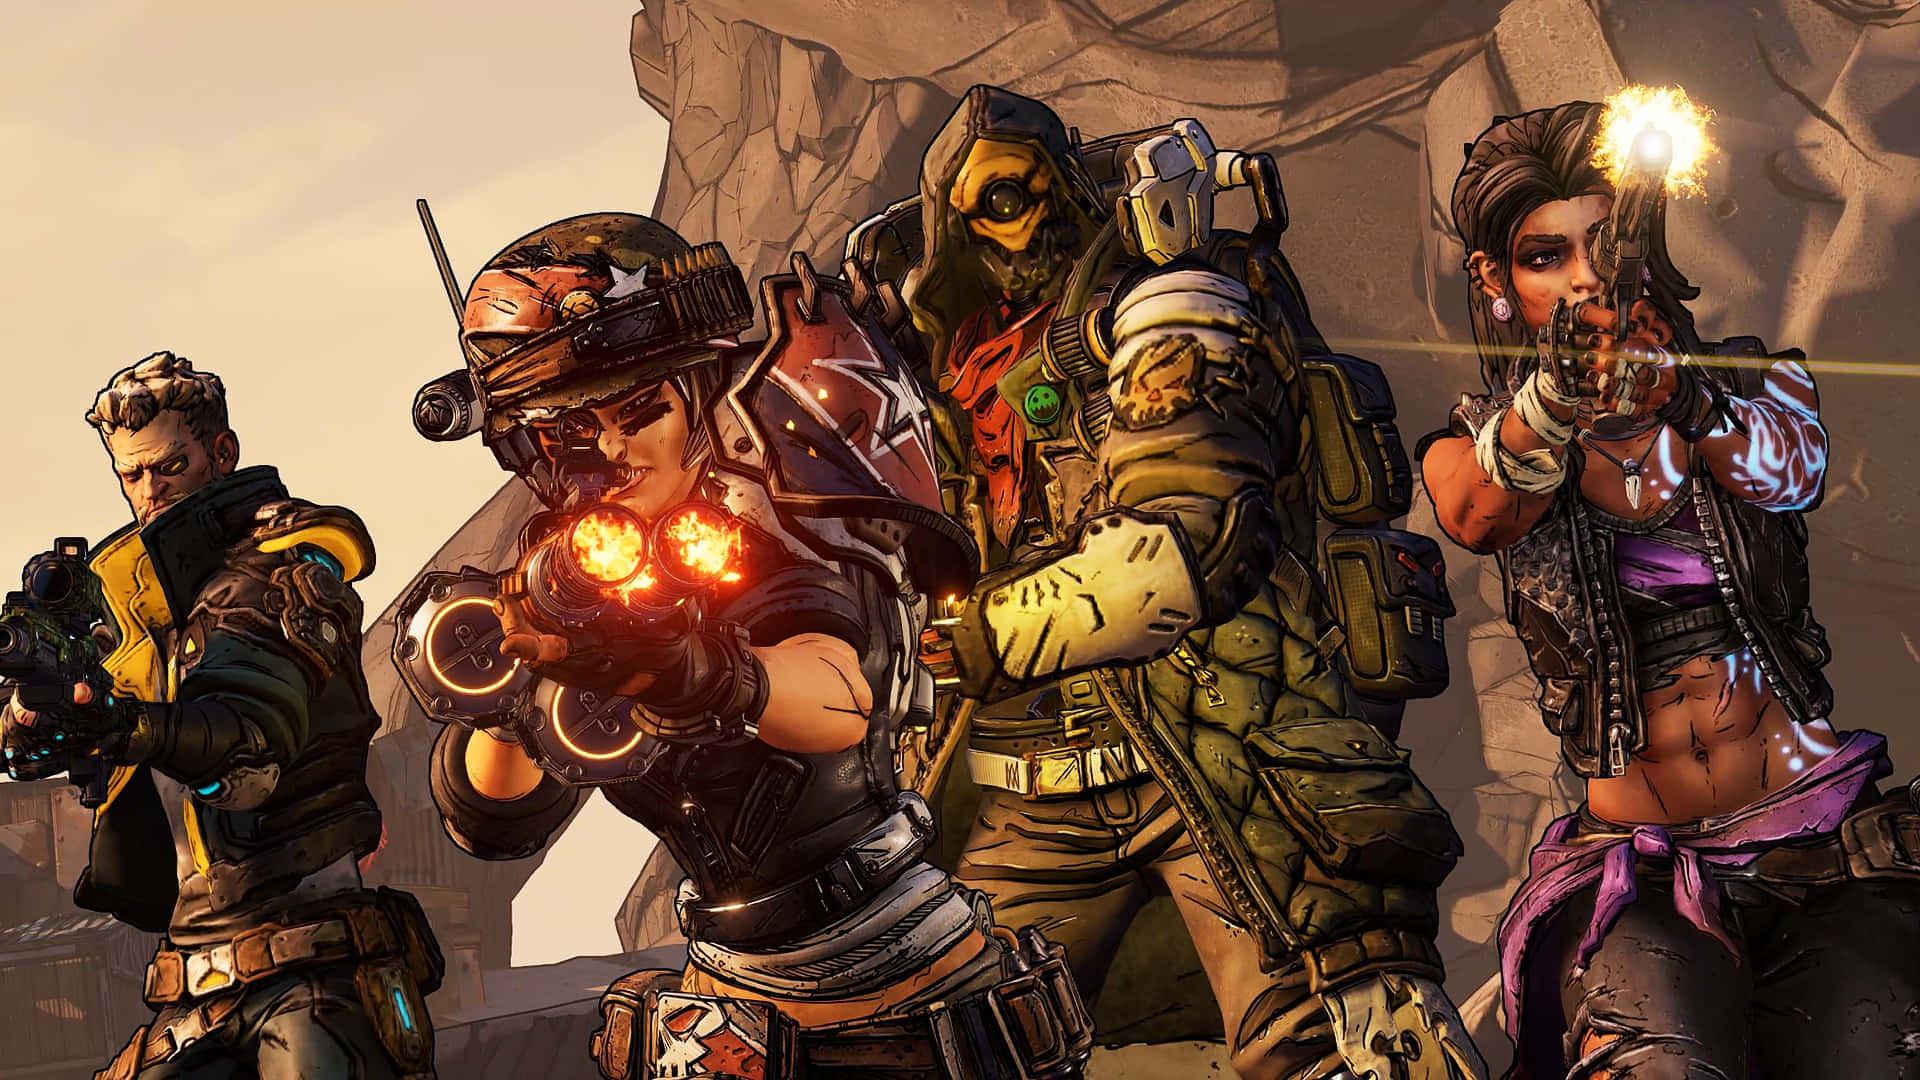 Image  Prepare to Play Borderlands 3 in Gorgeous High Definition